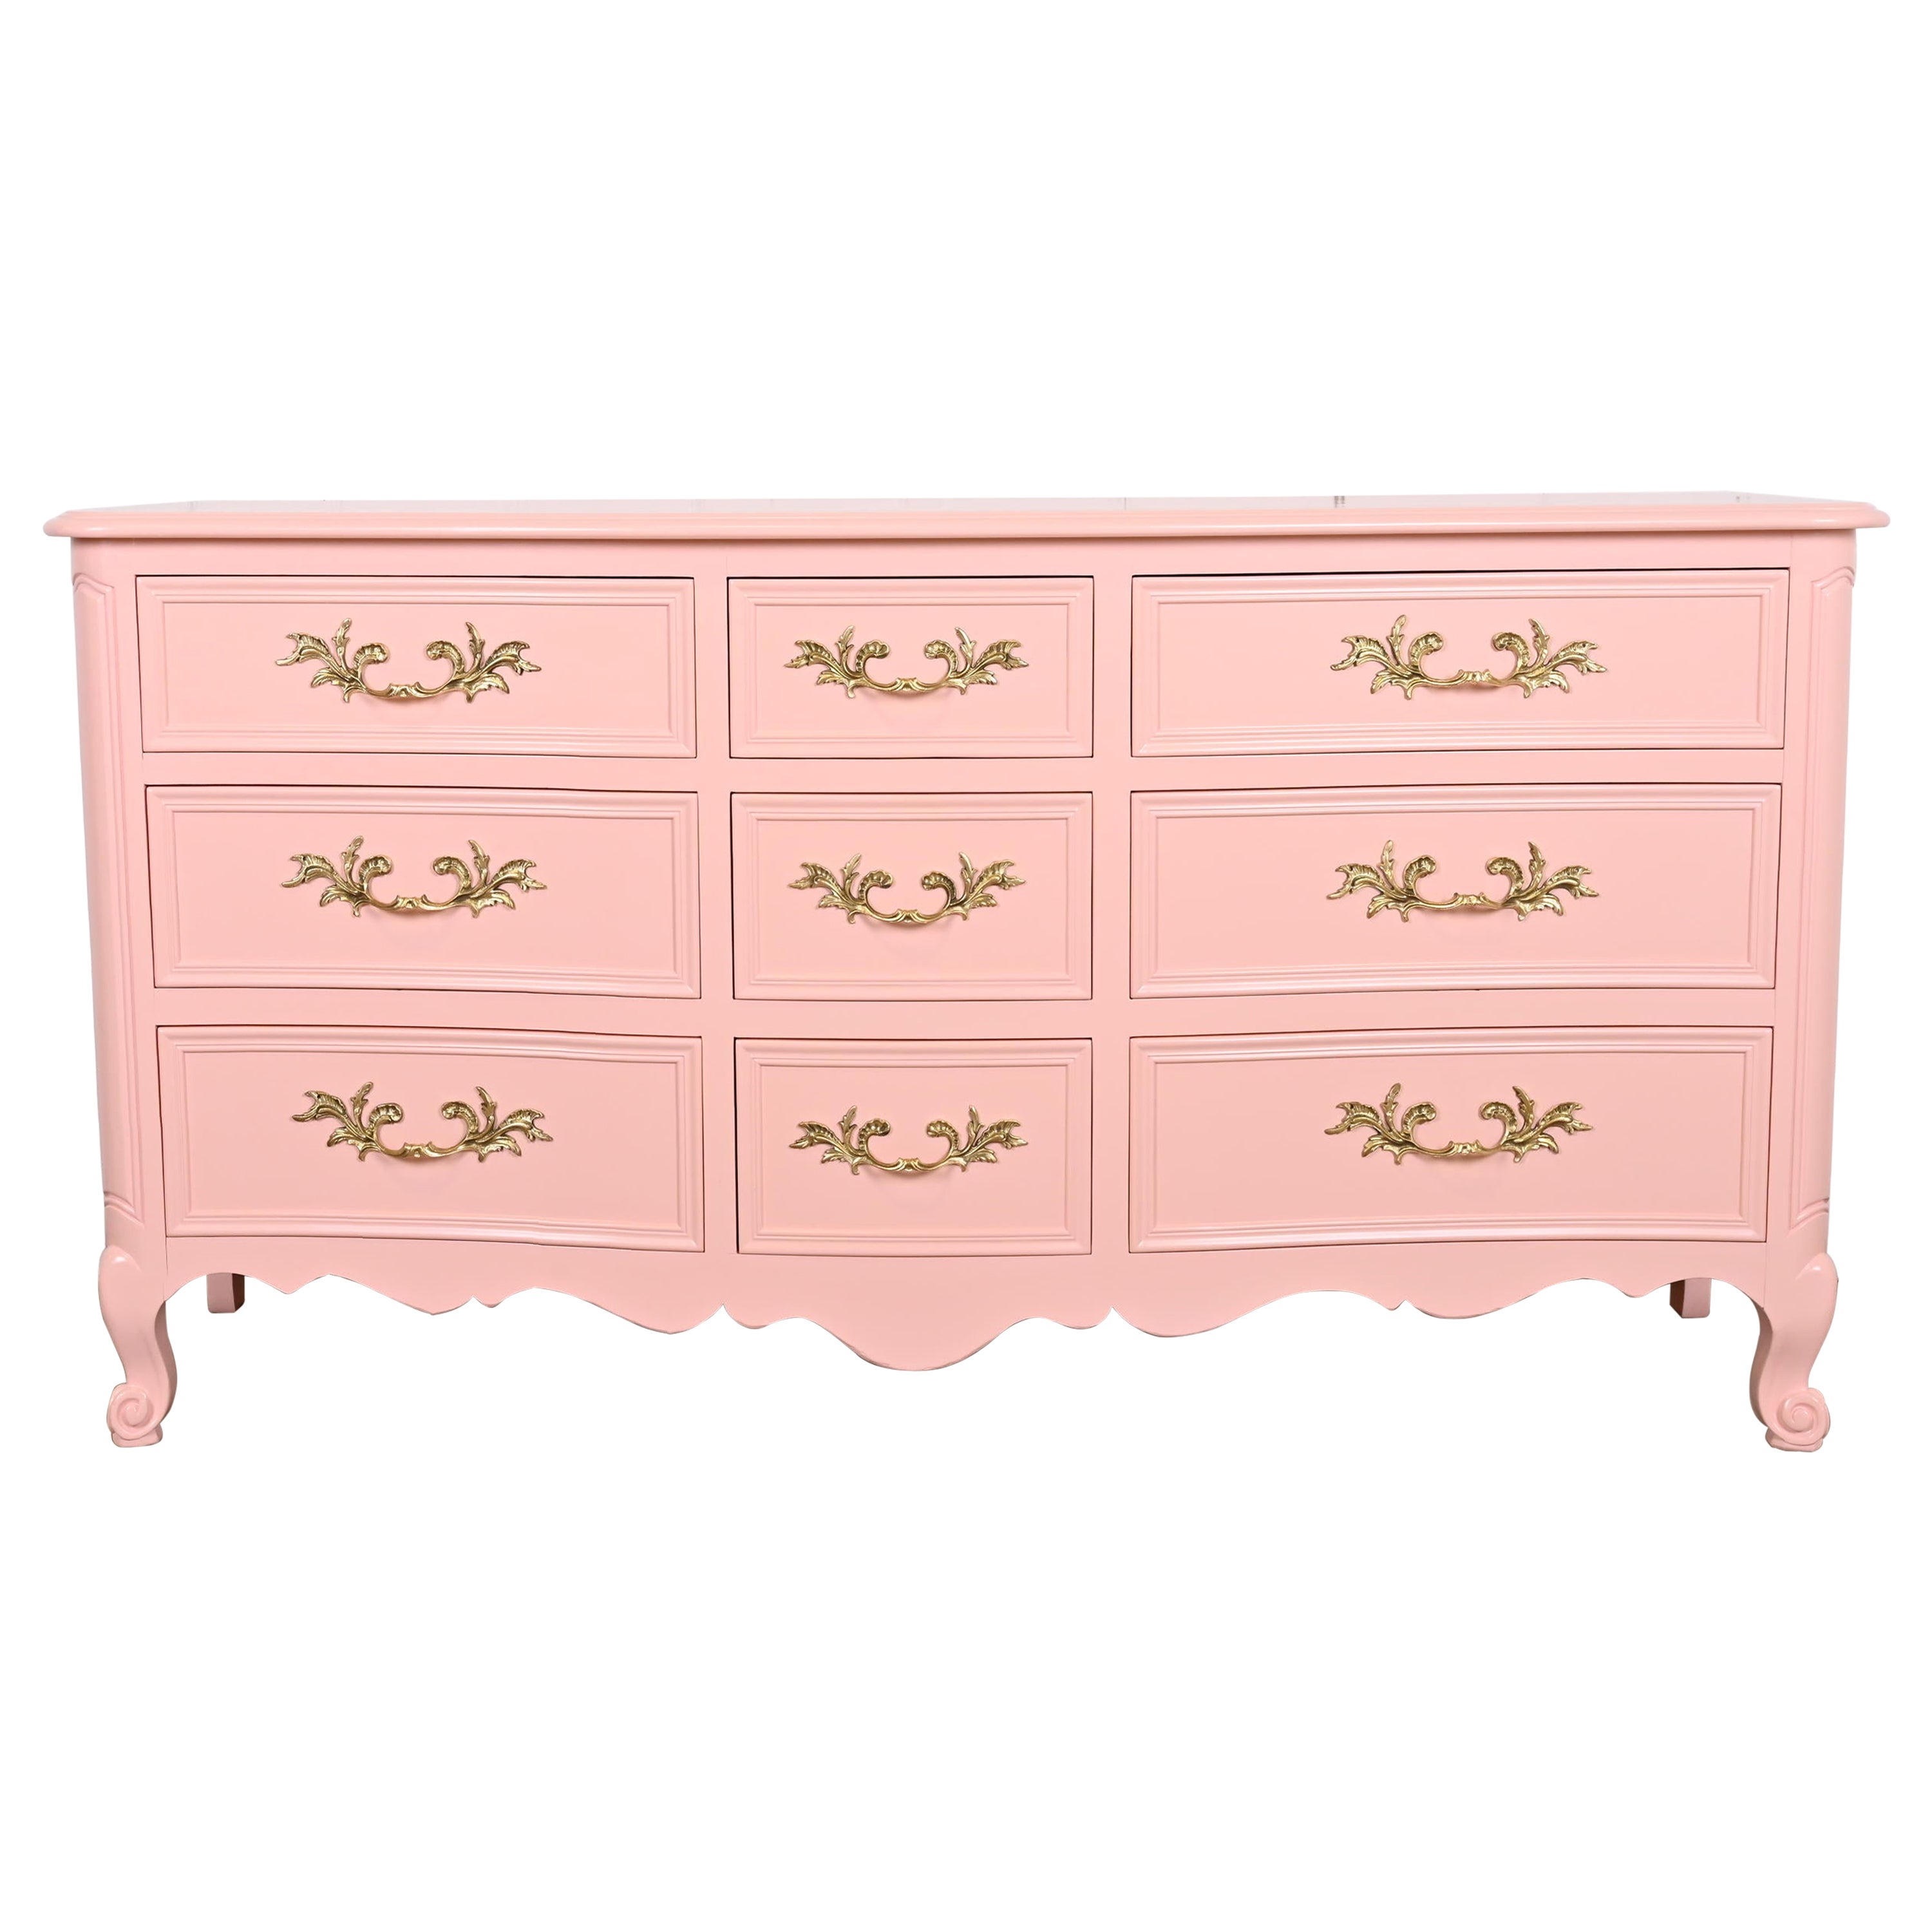 Kindel Furniture French Provincial Louis XV Pink Lacquered Dresser, Refinished